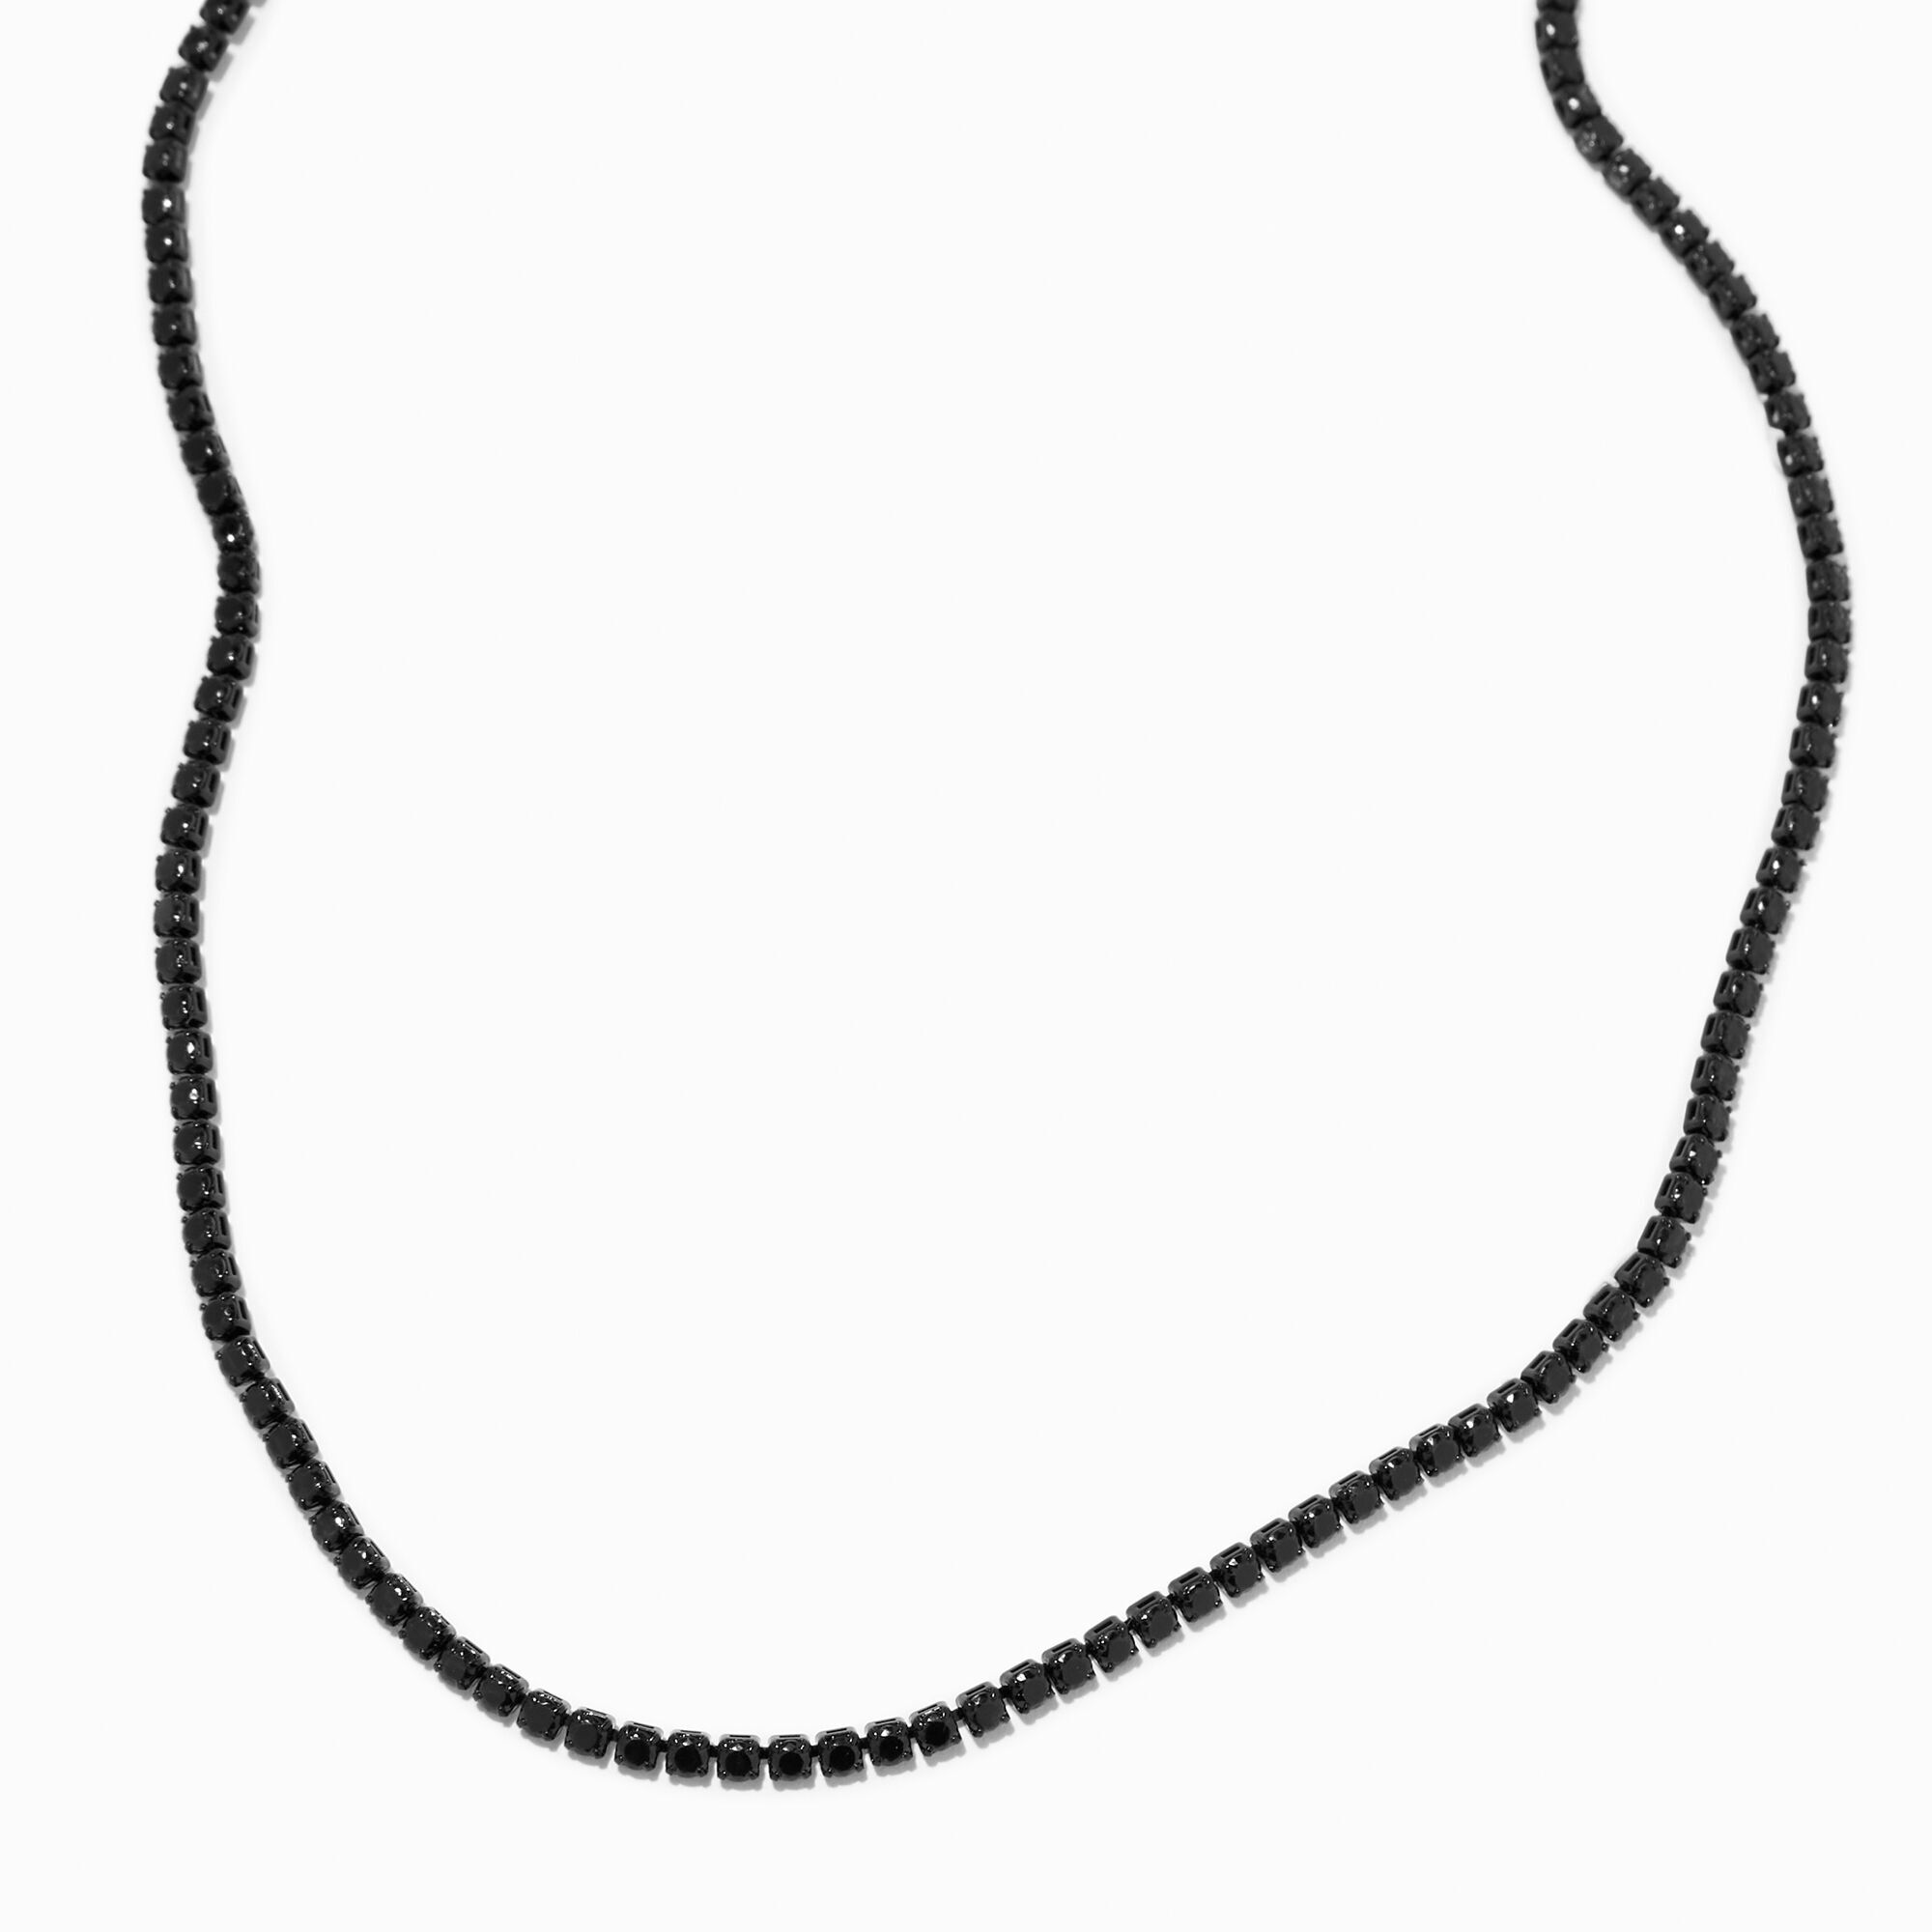 View Claires Cubic Zirconia Chain Necklace Black information